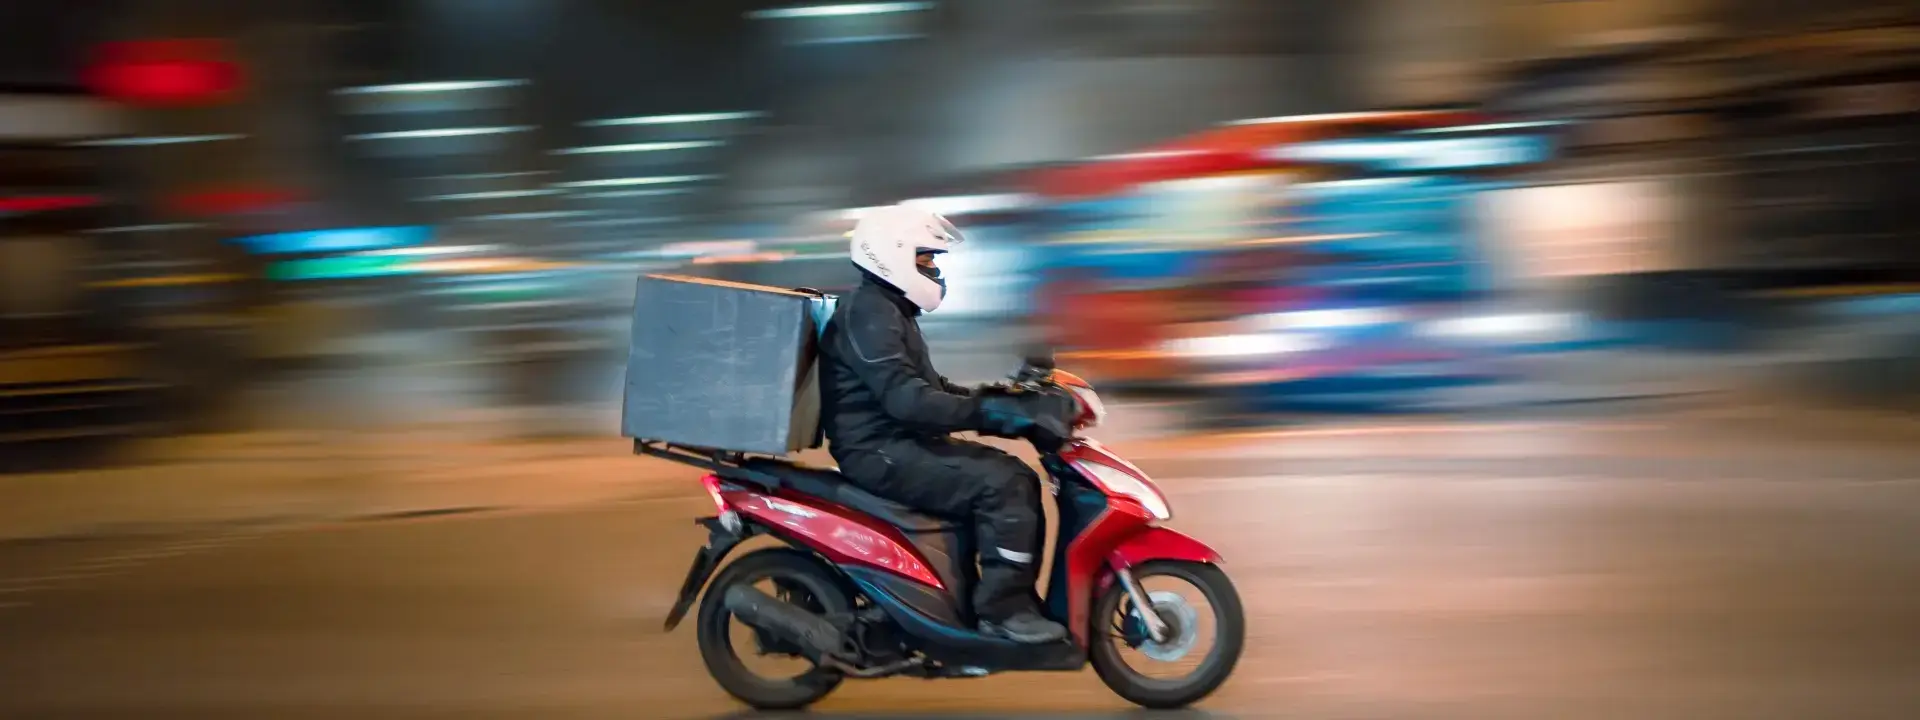 A Comprehensive Review of Deliveroo: Food Delivery Revolutionized